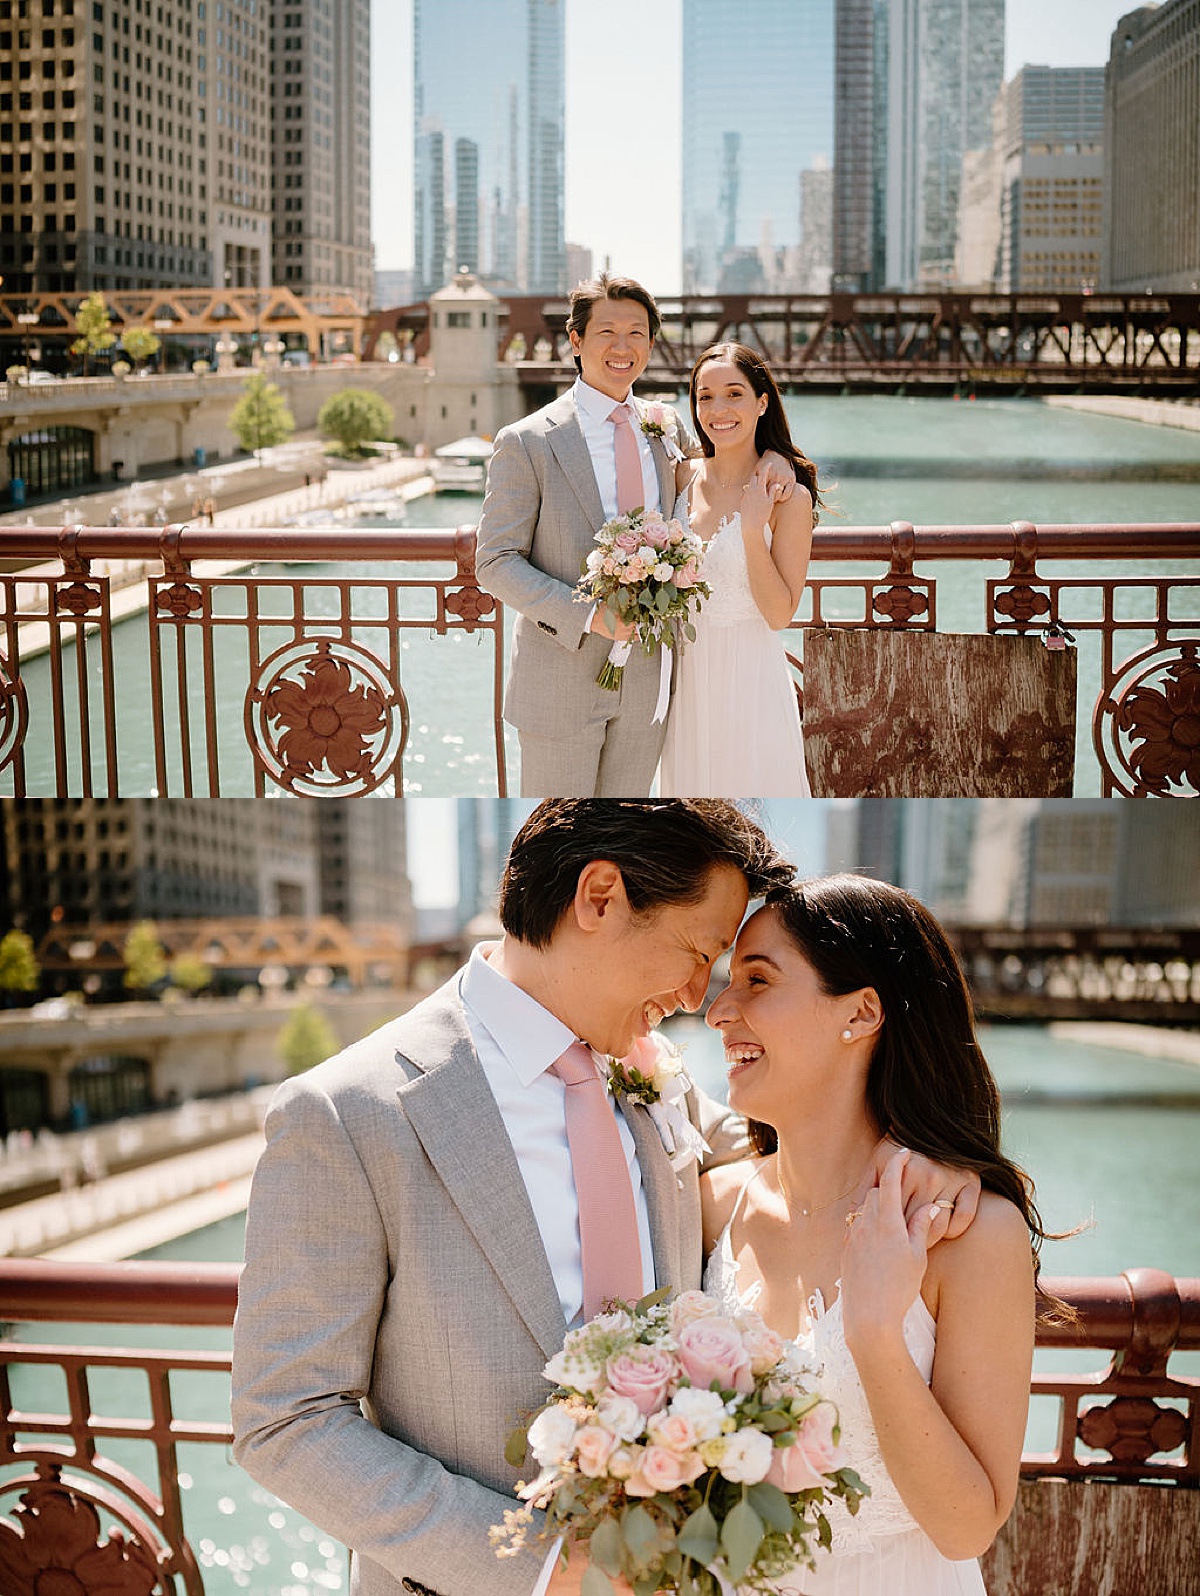 groom in gray suit and pink tie poses with bride in delicate gown on Chicago bridge after city hall sweetheart elopement